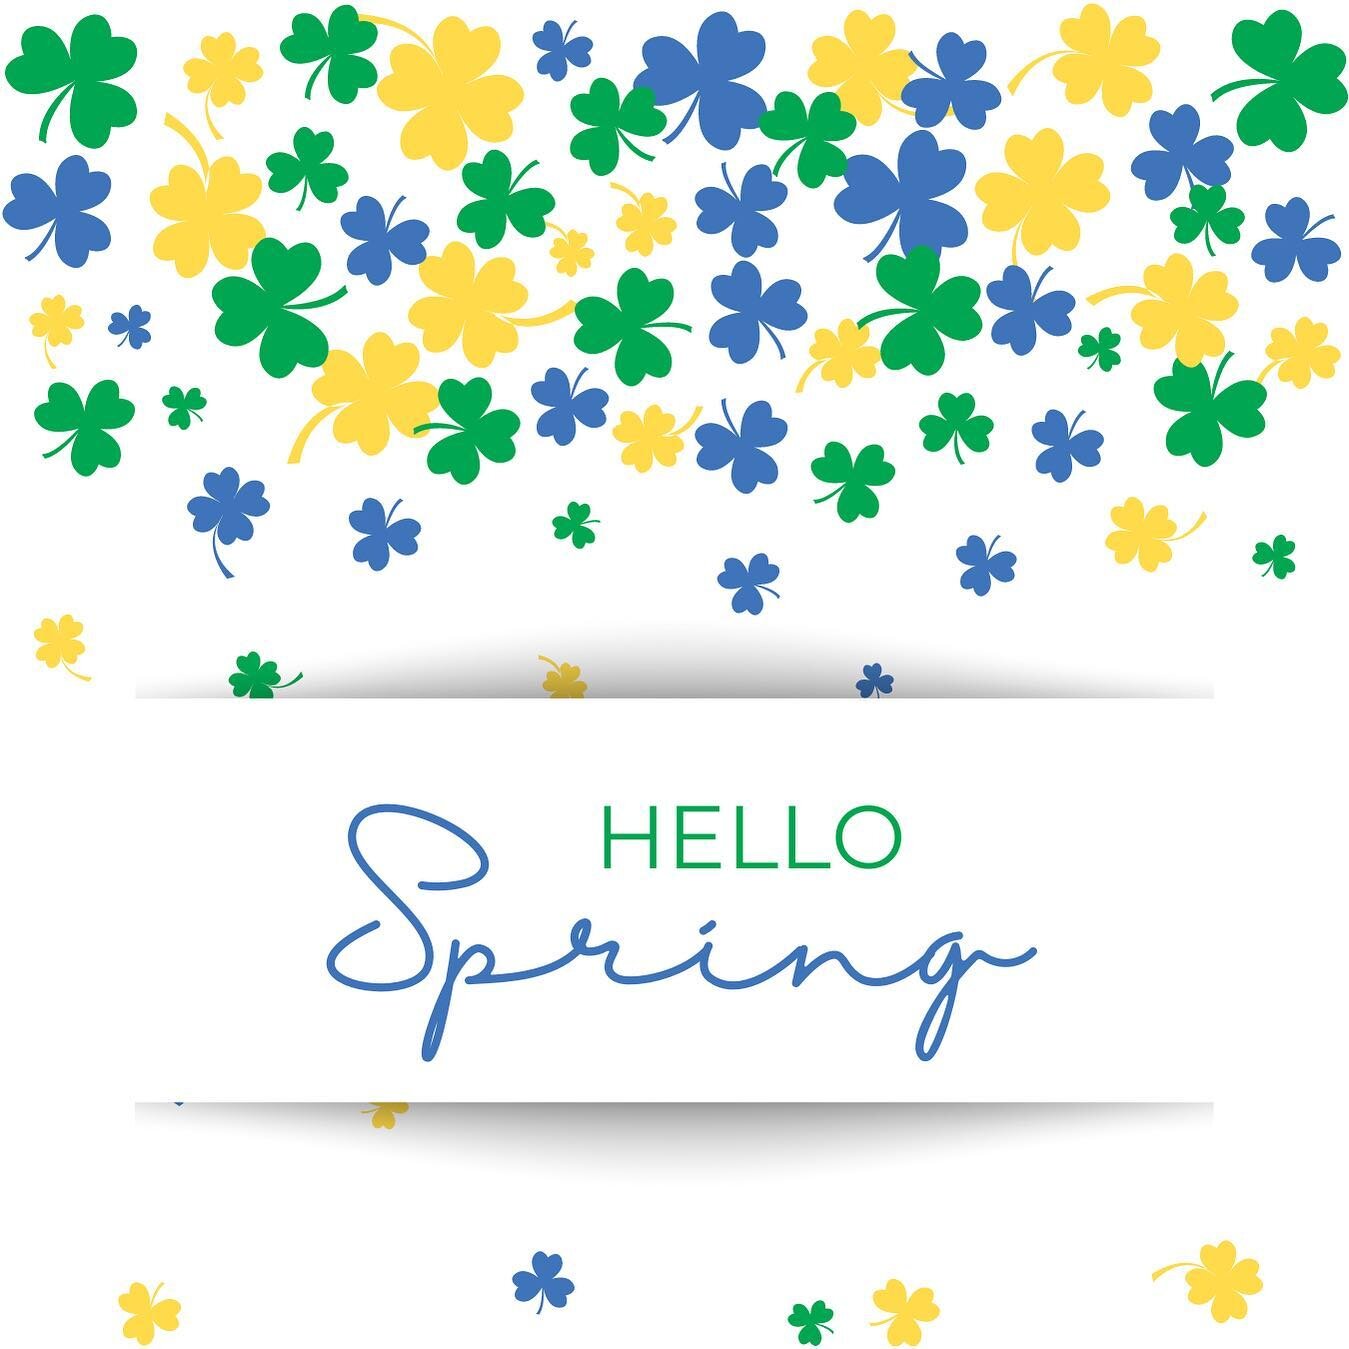 Spring has sprung! 🌸🌼

Let's welcome the season of new beginnings with open arms and fresh opportunities. Whether you're looking to buy or sell, our team at Apex Realty of the Carolinas is ready to help make your real estate dreams a reality. 

Let